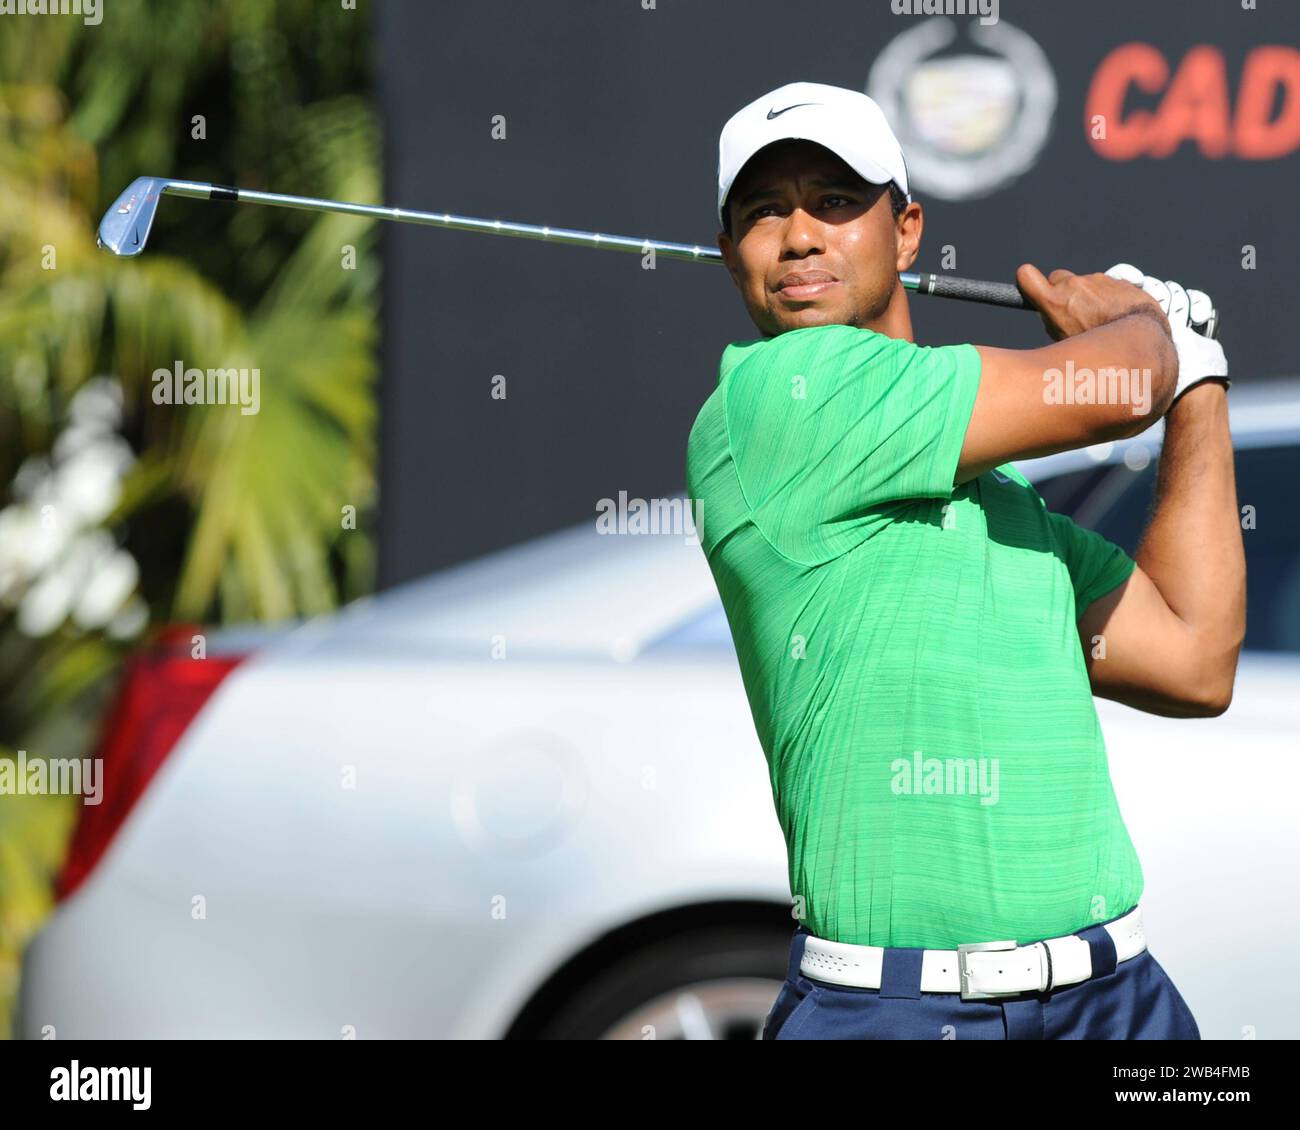 **FILE PHOTO** Tiger Woods and Nike End 27 Year Partnership. MIAMI, FL - MARCH 10: Tiger Woods plays during the third round of the World Golf Championship s Cadillac Championship at Doral Golf Resort And Spa on March 10, 2012 in Miami, Florida. Copyright: xmpi04/MediaPunchx Stock Photo